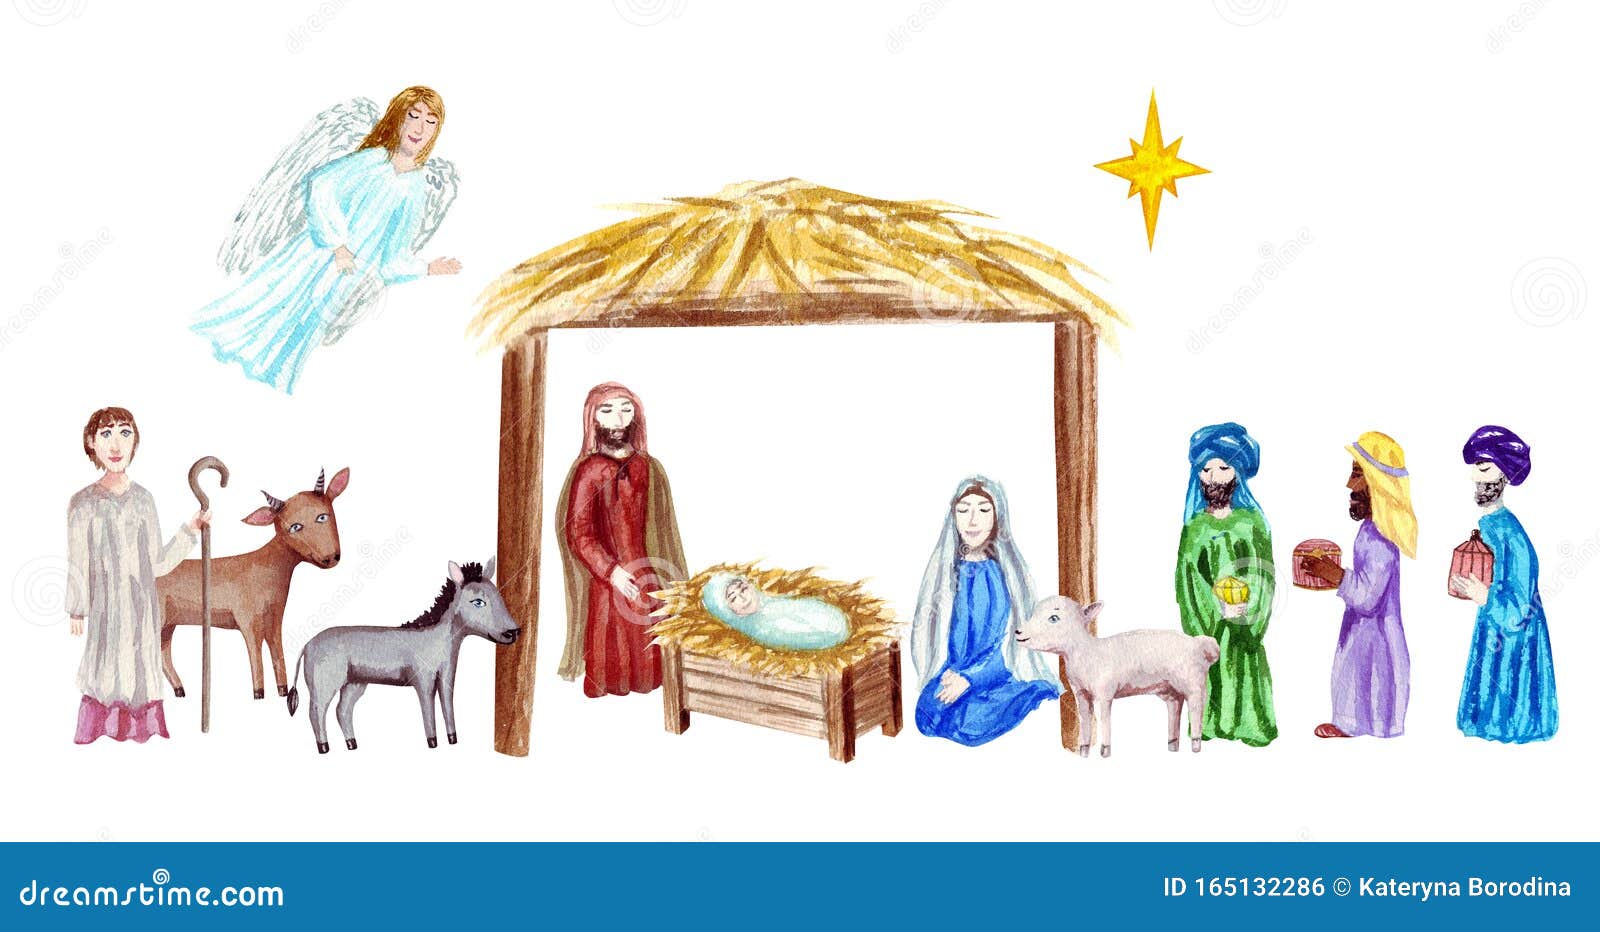 8 Religious CHRISTMAS CARDS NATIVITY picture with Children Shepherds & Angels 